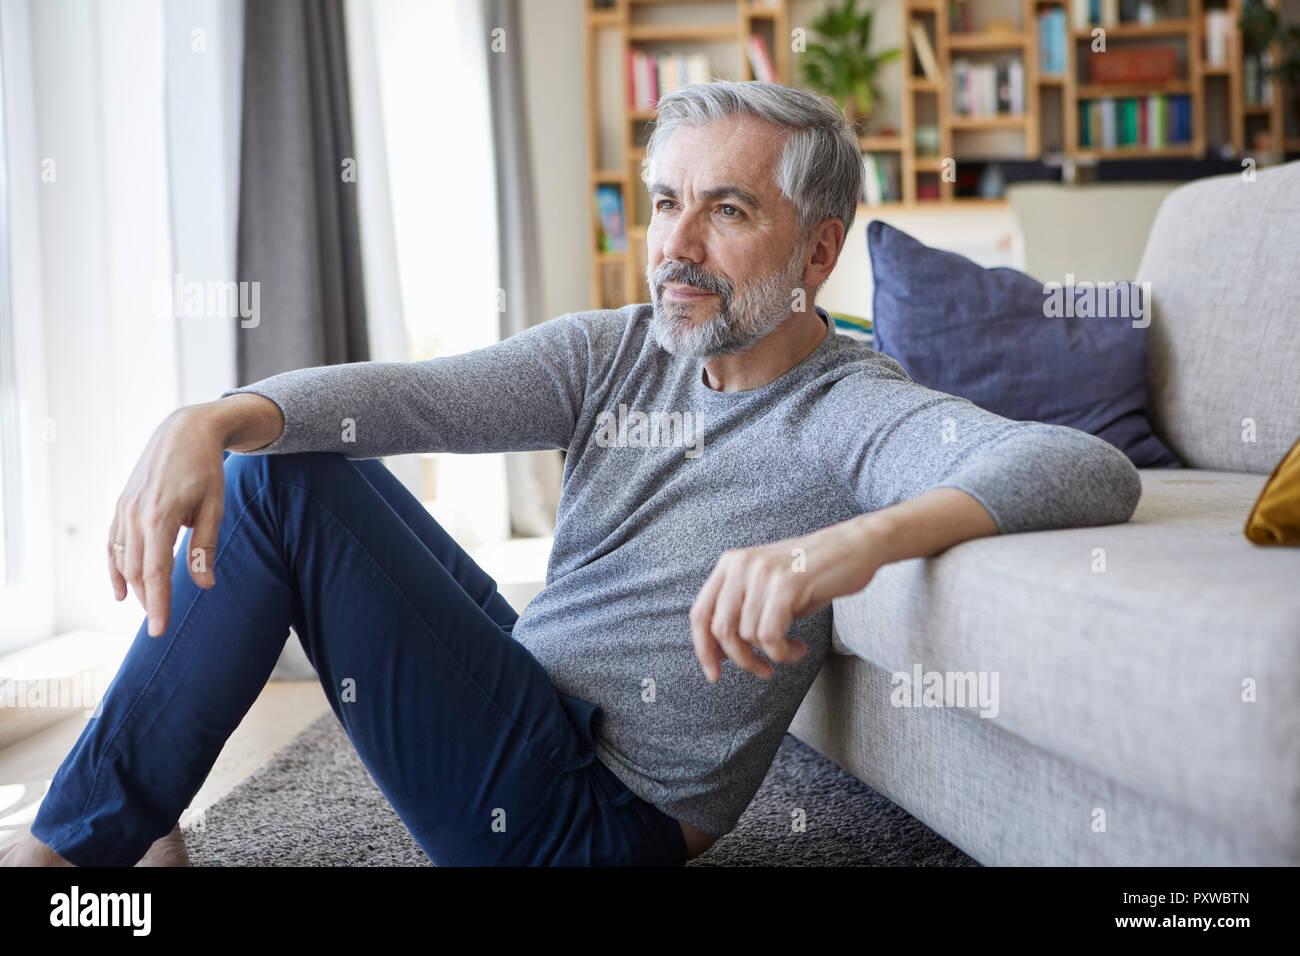 Mature man sitting on floor of his living room looking out of window Stock Photo